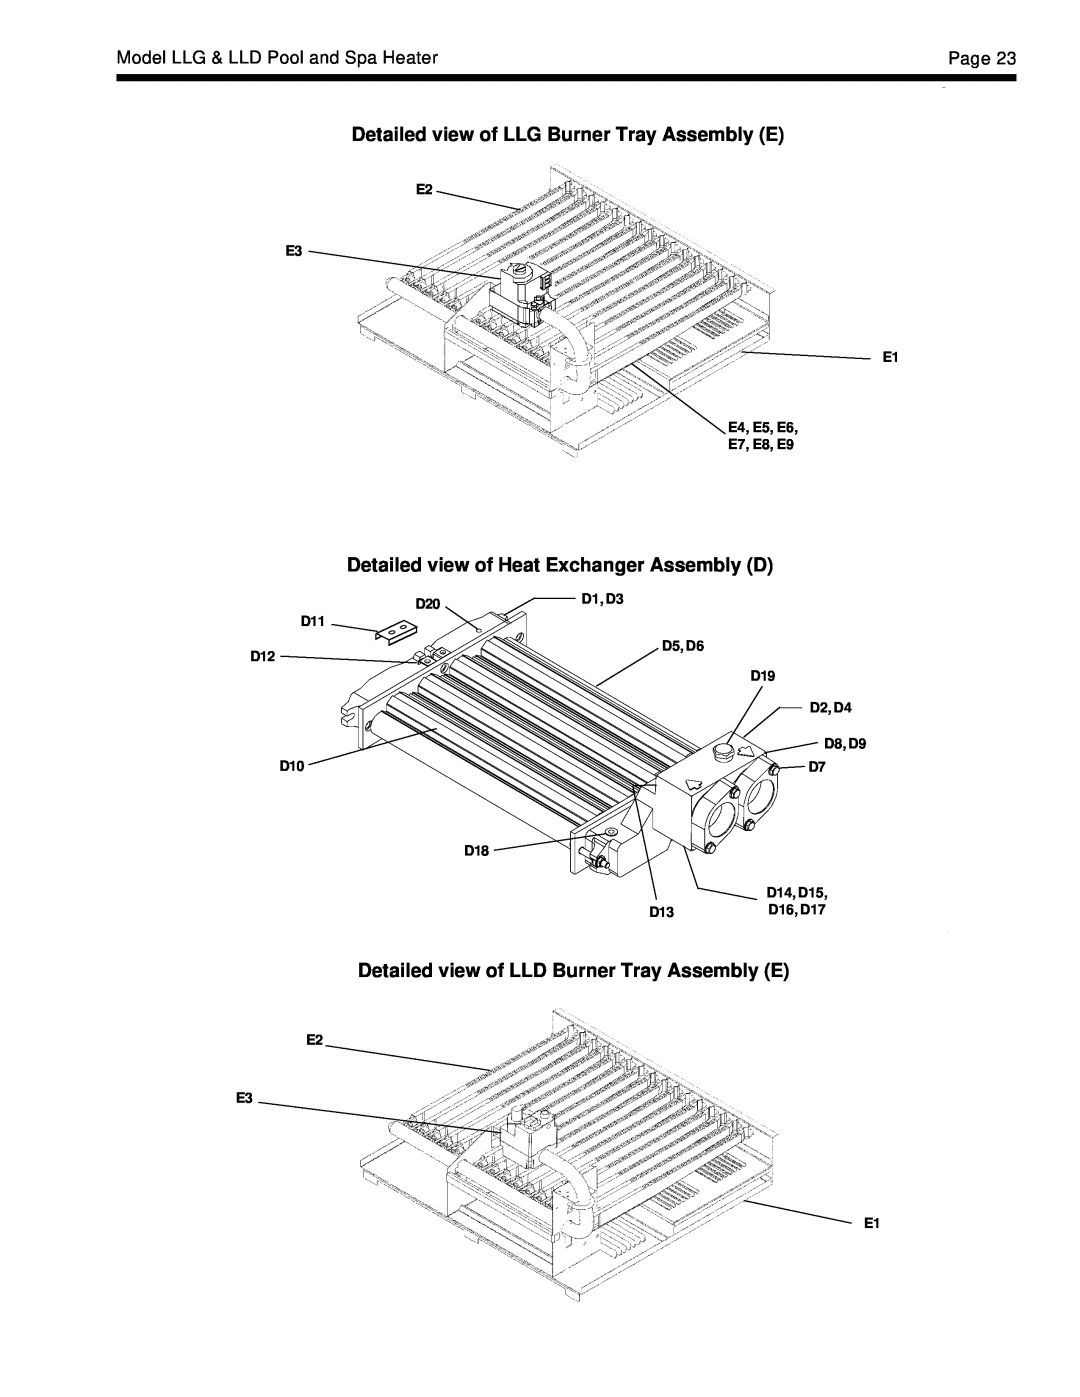 Teledyne Detailed view of LLG Burner Tray Assembly E, Detailed view of Heat Exchanger Assembly D, Page, D1, D3, E2 E3 